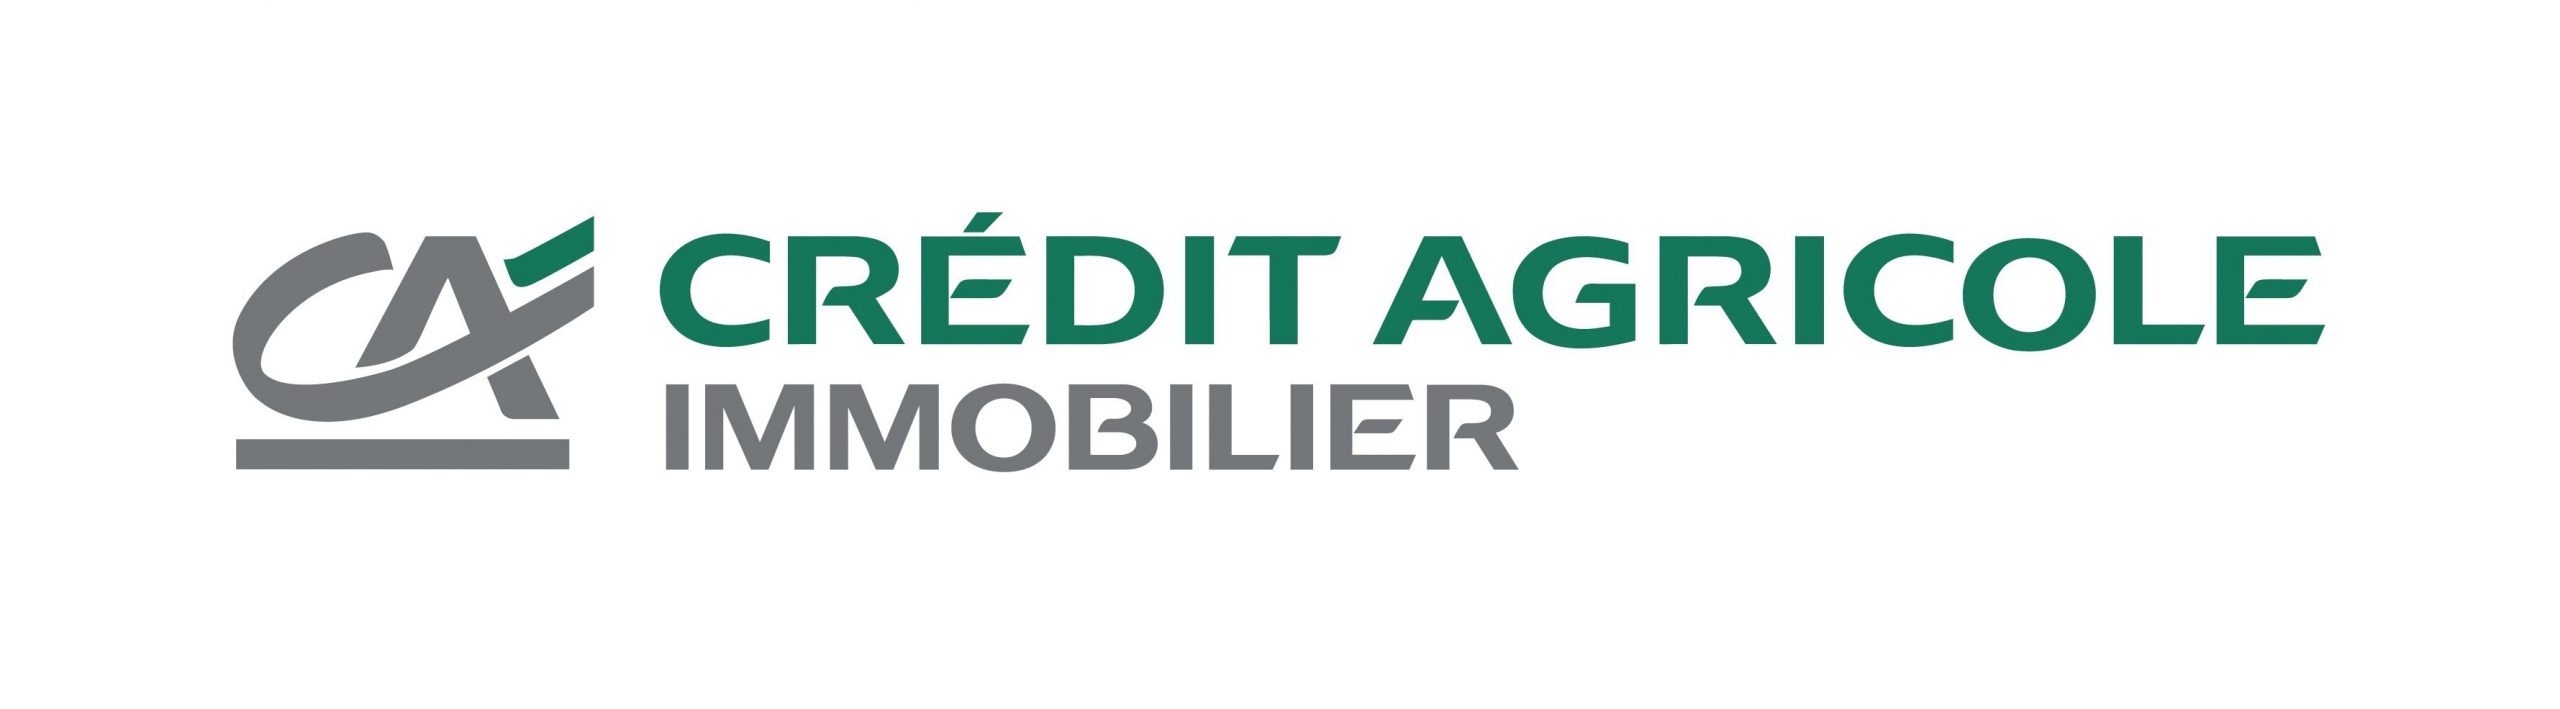 credit_agricole_immobilier